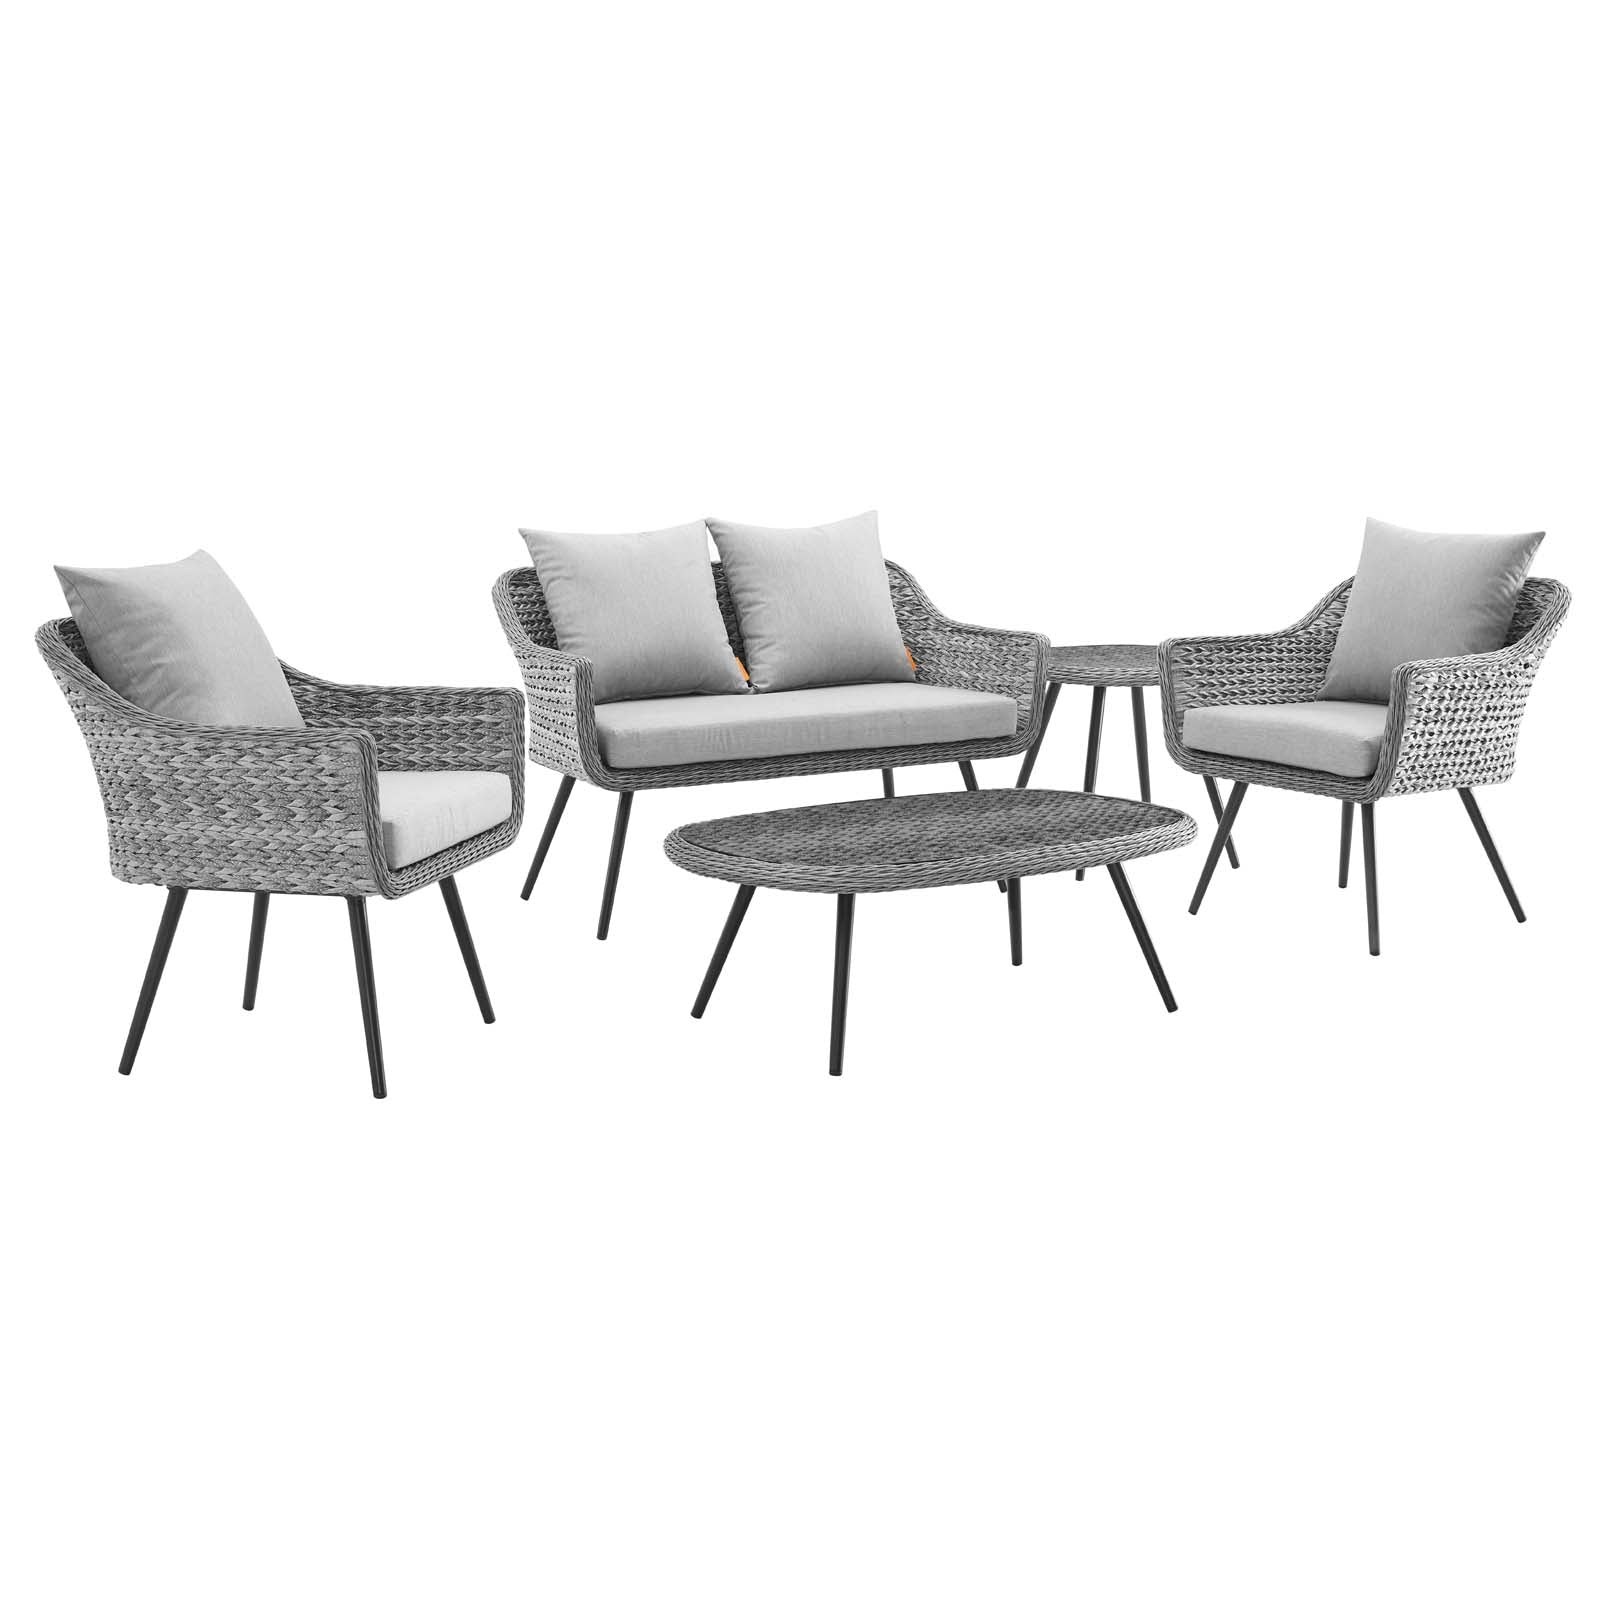 Endeavor 5 Piece Outdoor Patio Wicker Rattan Sectional Sofa Set-Outdoor Set-Modway-Wall2Wall Furnishings